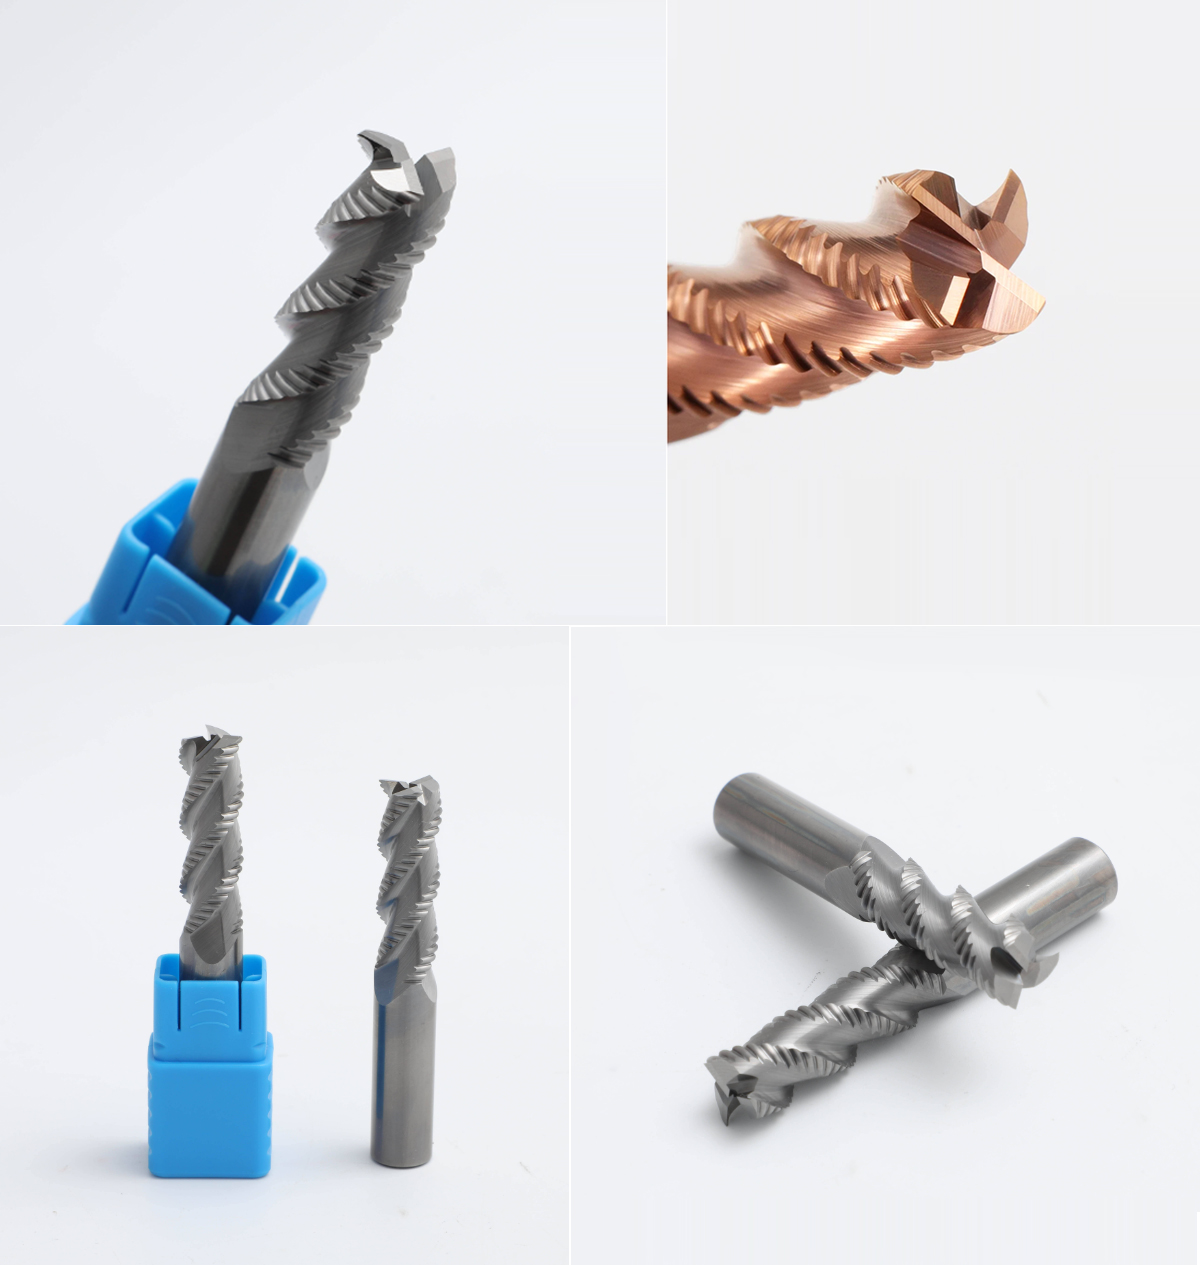 HJPR650 4 flutes roughing end mill for steels & cast iron (≤ 60 HRC)